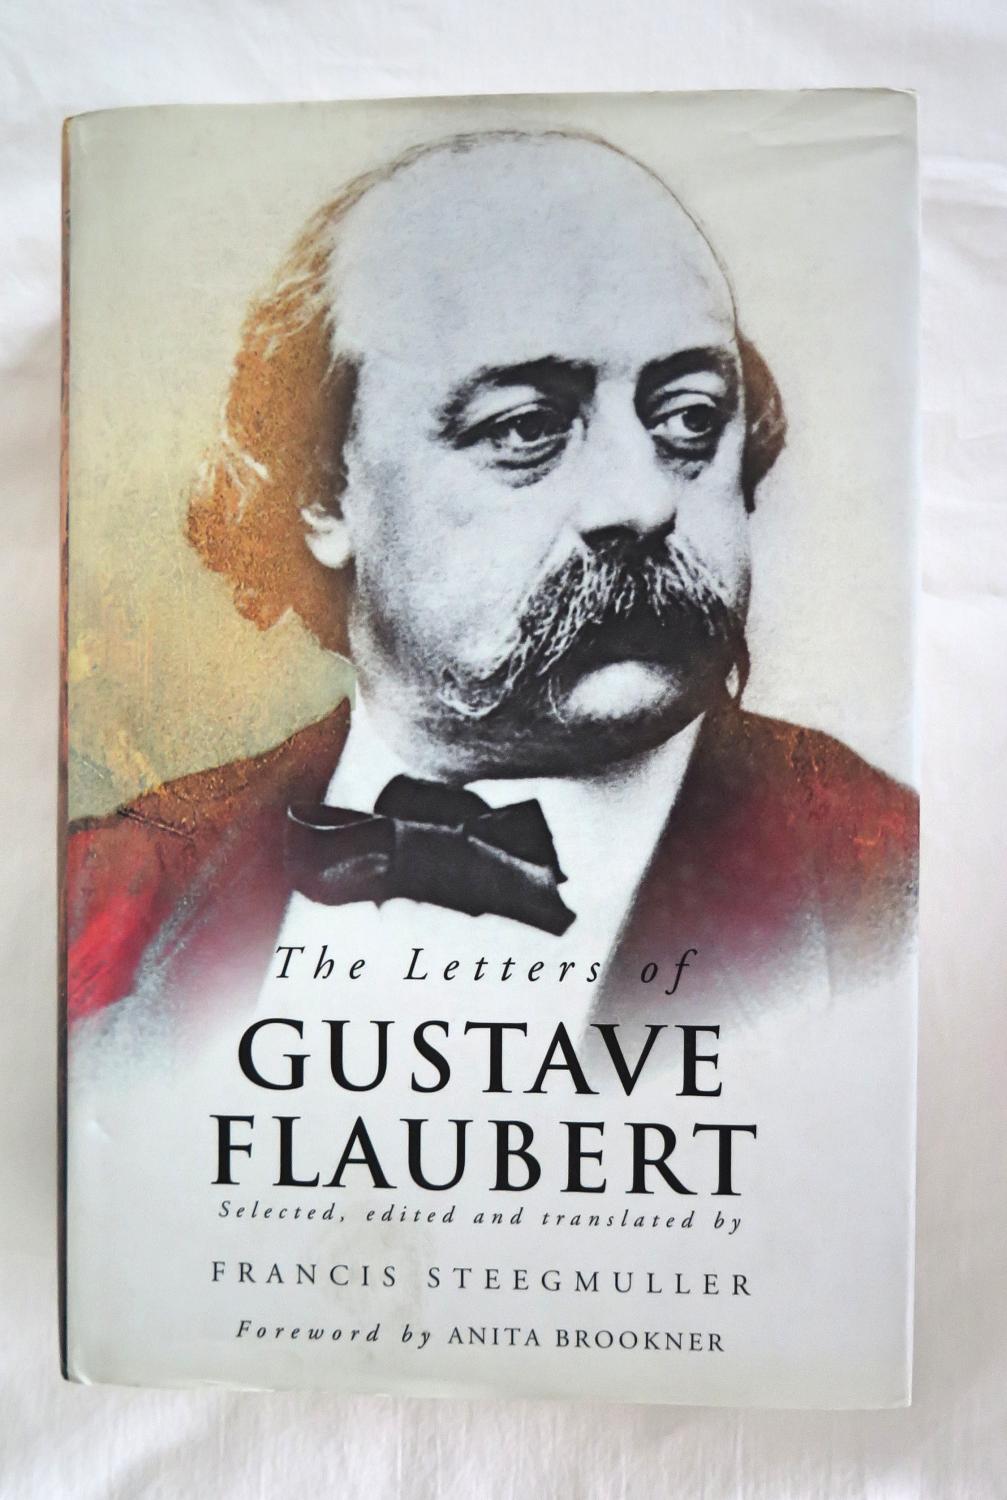 The Letters of Gustave Flaubert, Volumes I & II (1830-1880) UK FIRST EDITION - Flaubert, Gustave, with Steegmuller, Francis (Editor)